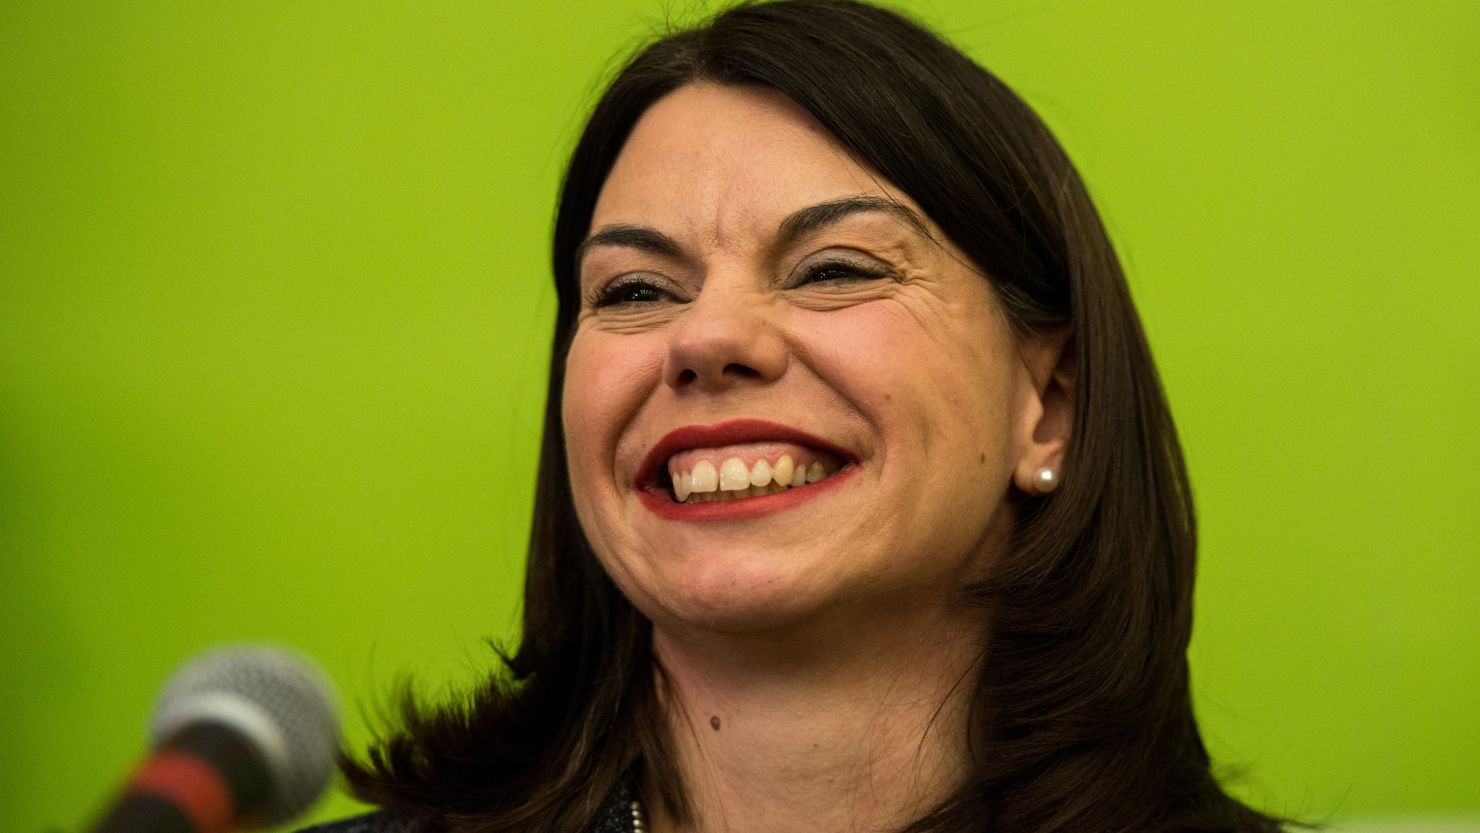 Liberal Democrat candidate Sarah Olney speaks onstage after winning the Richmond Park by-election in London.